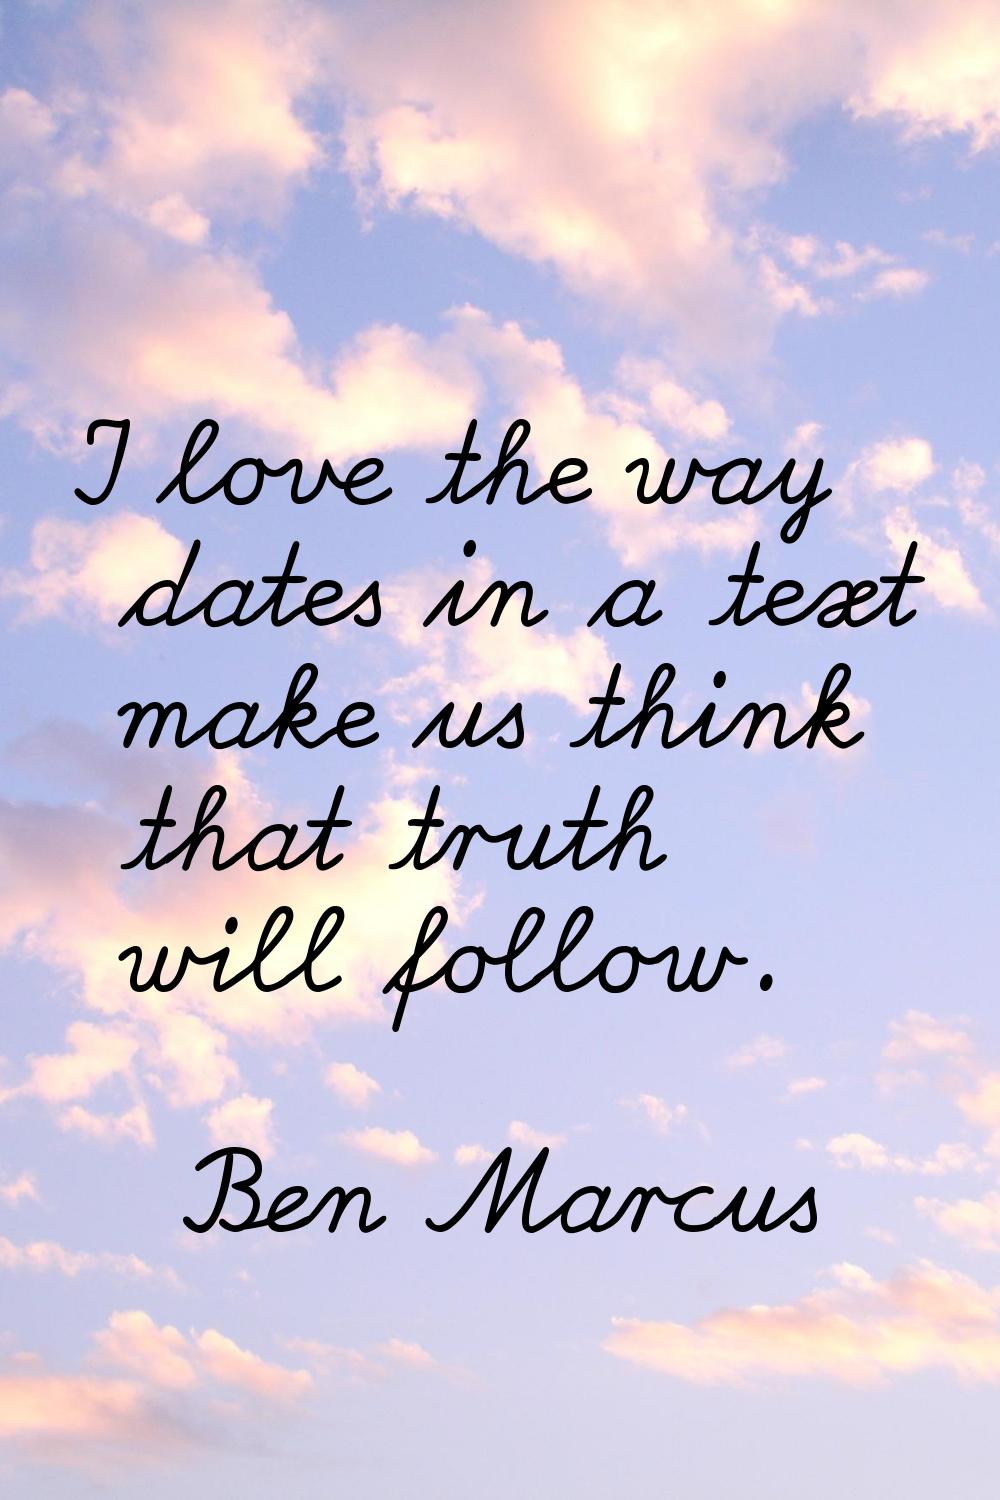 I love the way dates in a text make us think that truth will follow.